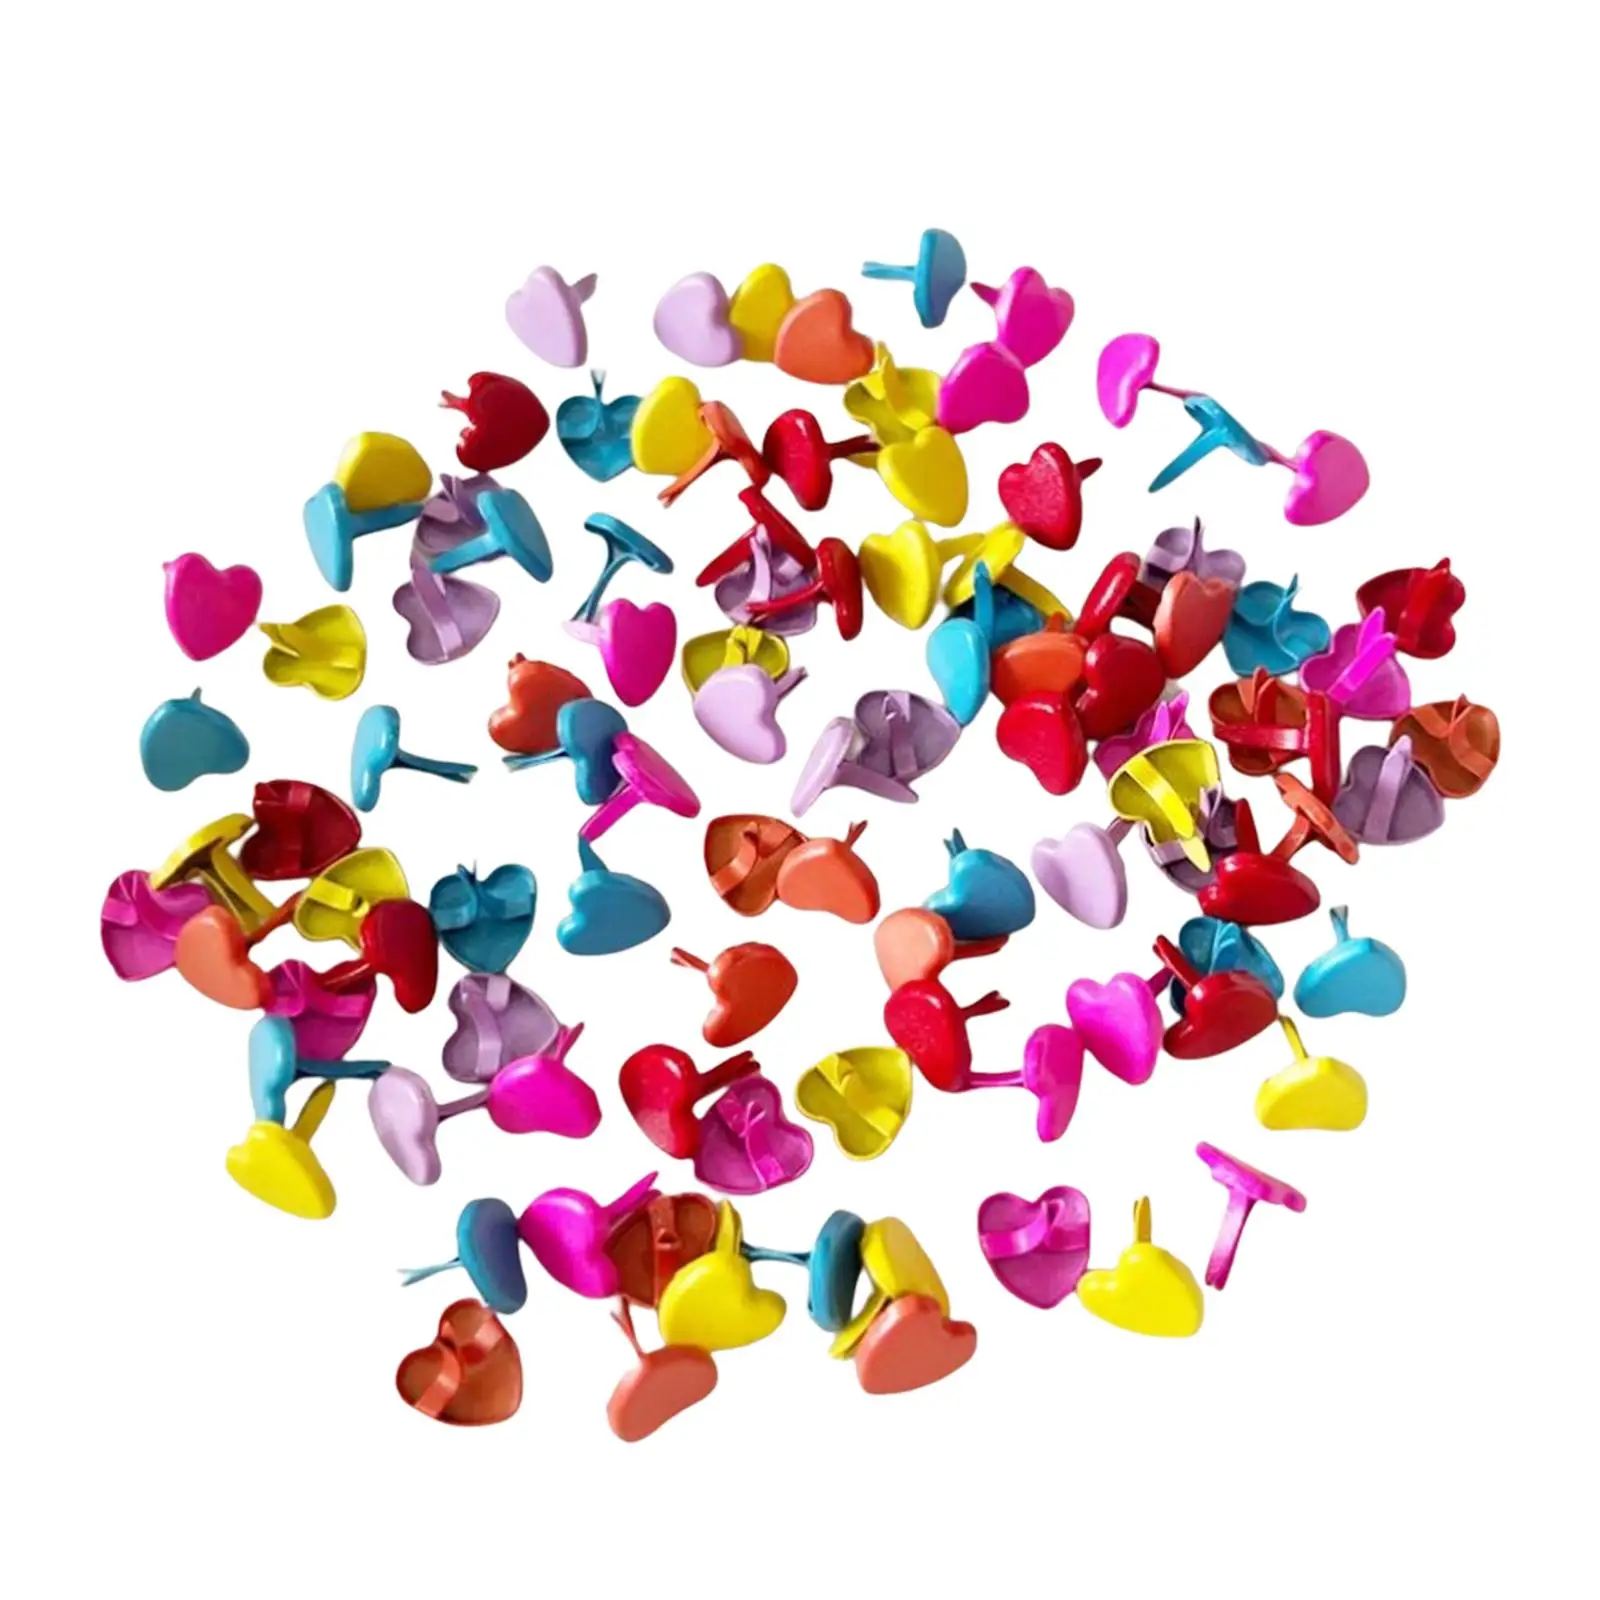 200 Pieces Small Metal Heart Brads Paper Fasteners Multicolor for Art Scrapbooking Crafting Wide Application Durable Split Pins